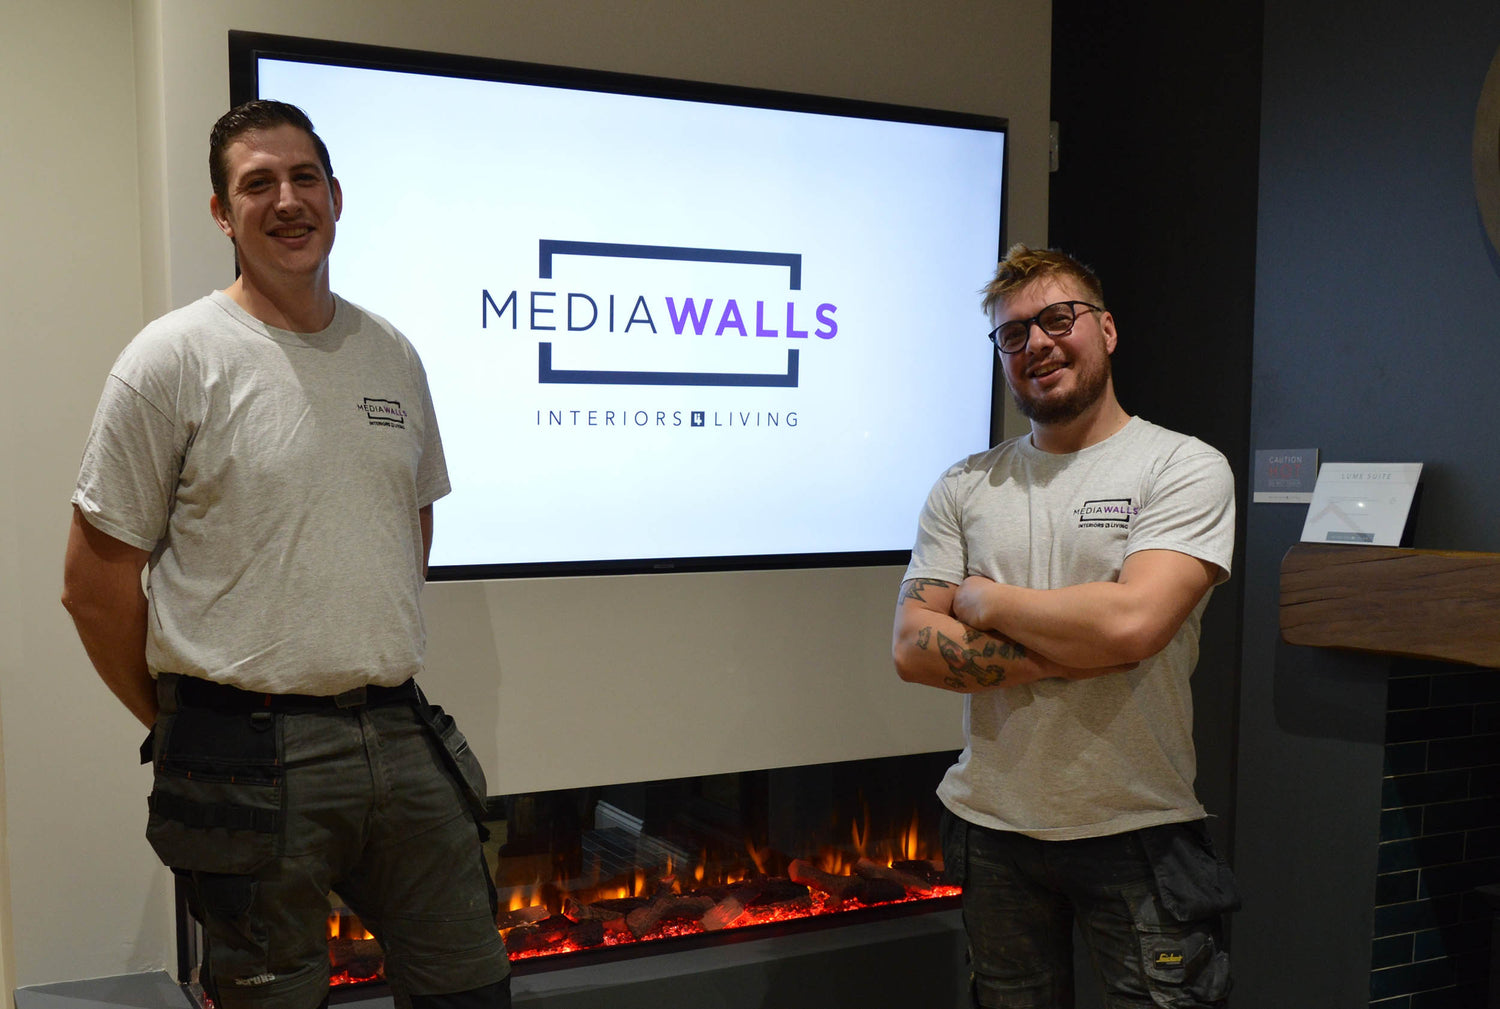 Stage 20 of installing your Media Wall visual fireplace